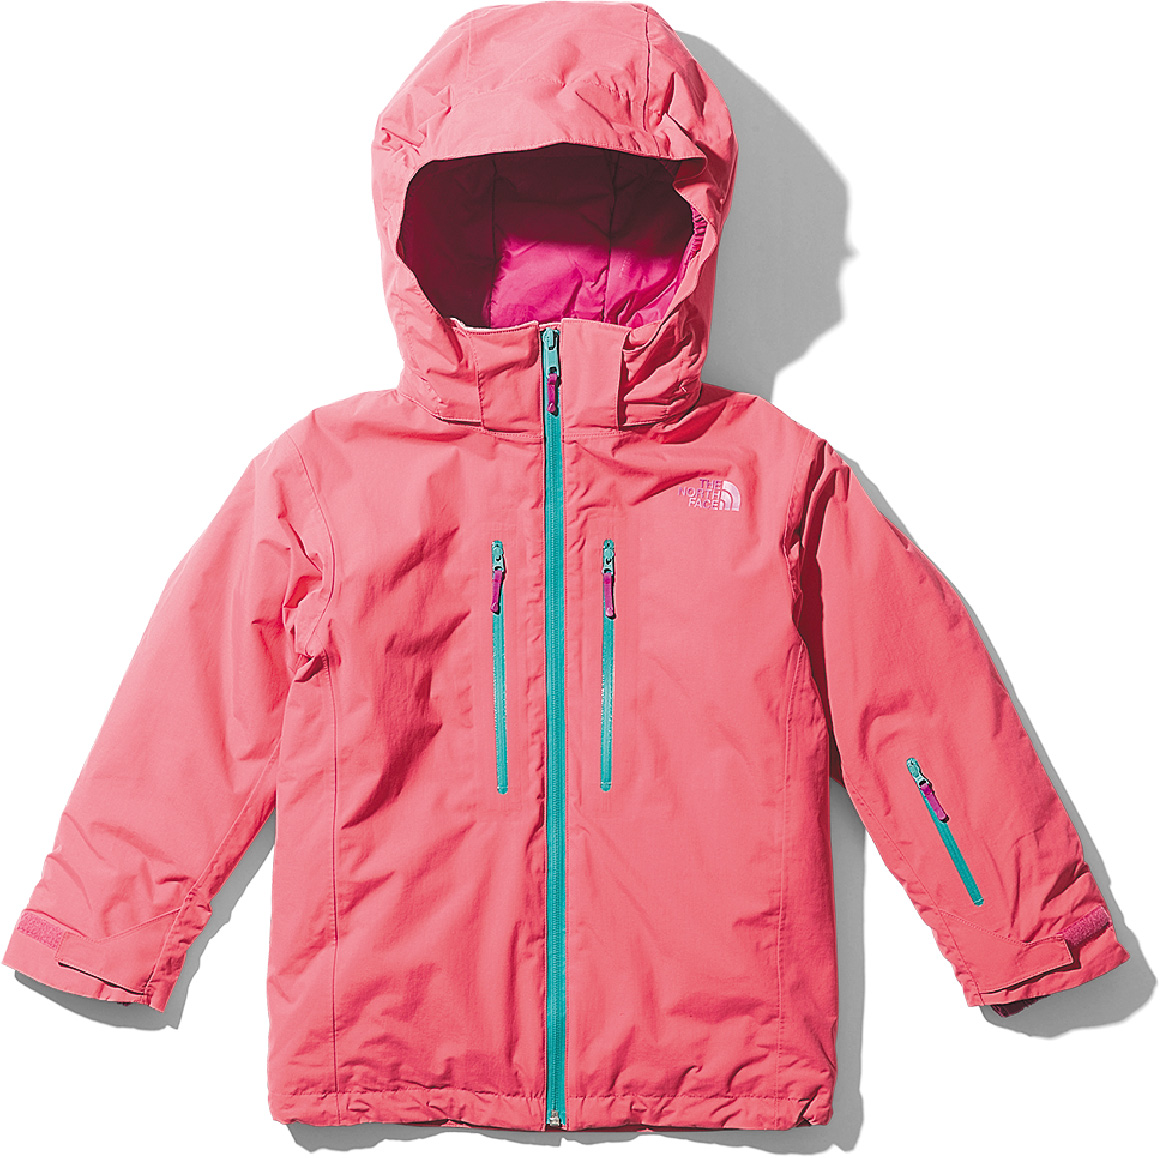 KIDS SNOW WEAR 2018 | THE NORTH FACE